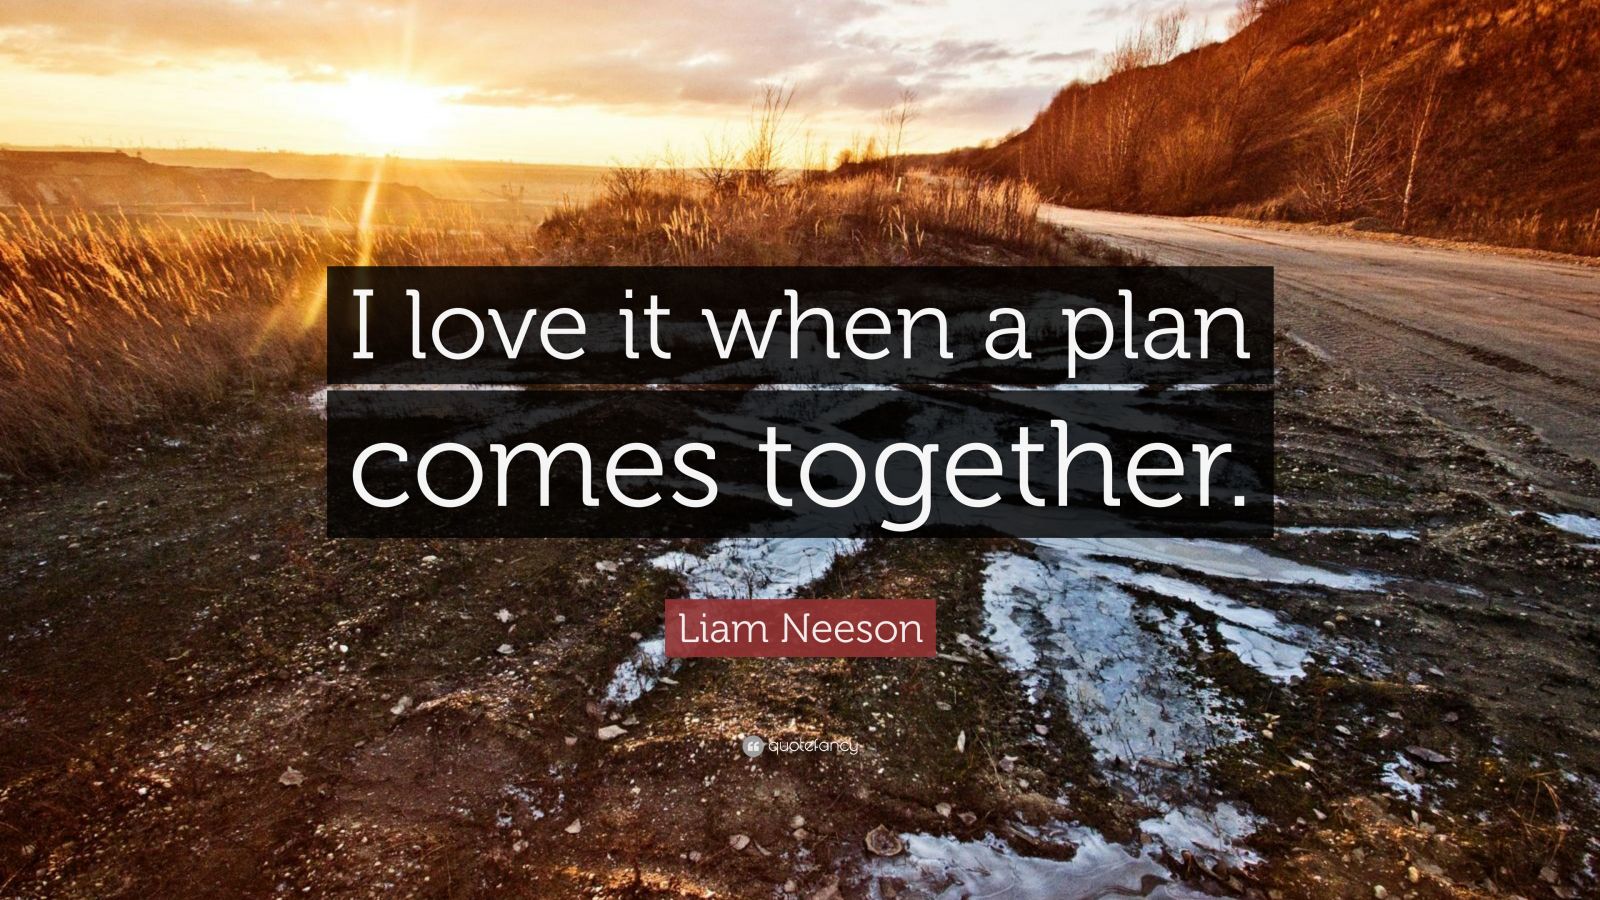 Liam Neeson Quote “i Love It When A Plan Comes Together ” 12